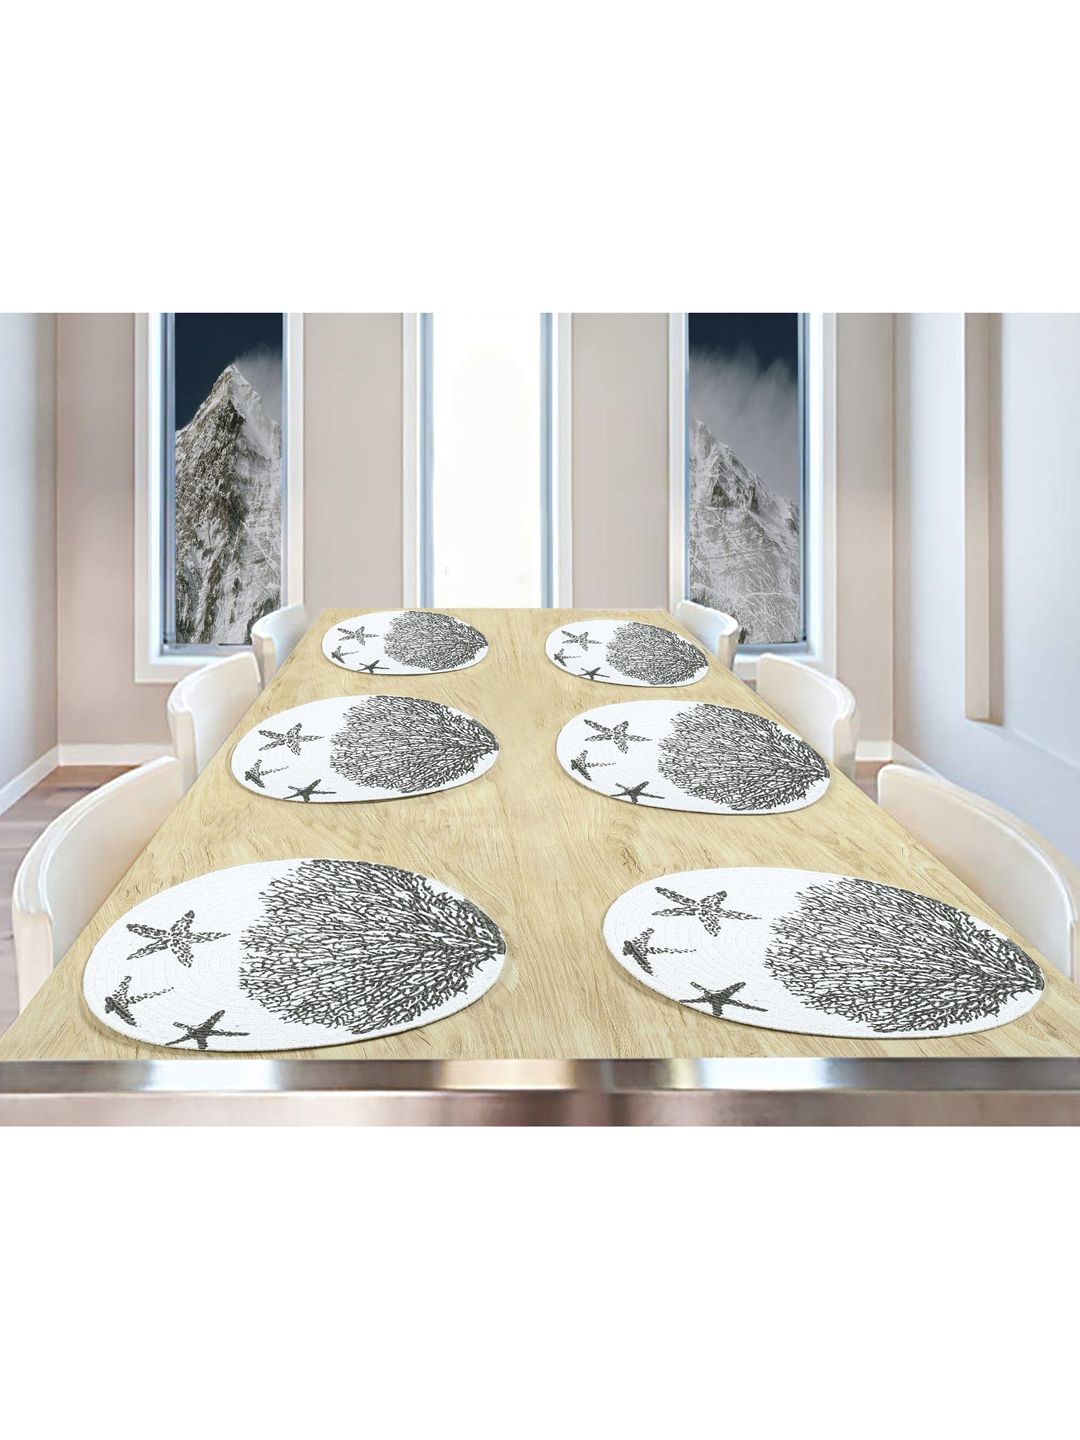 BELLA TRUE Set Of 6 White & Black Printed Pure Cotton Round Table Placemats Price in India